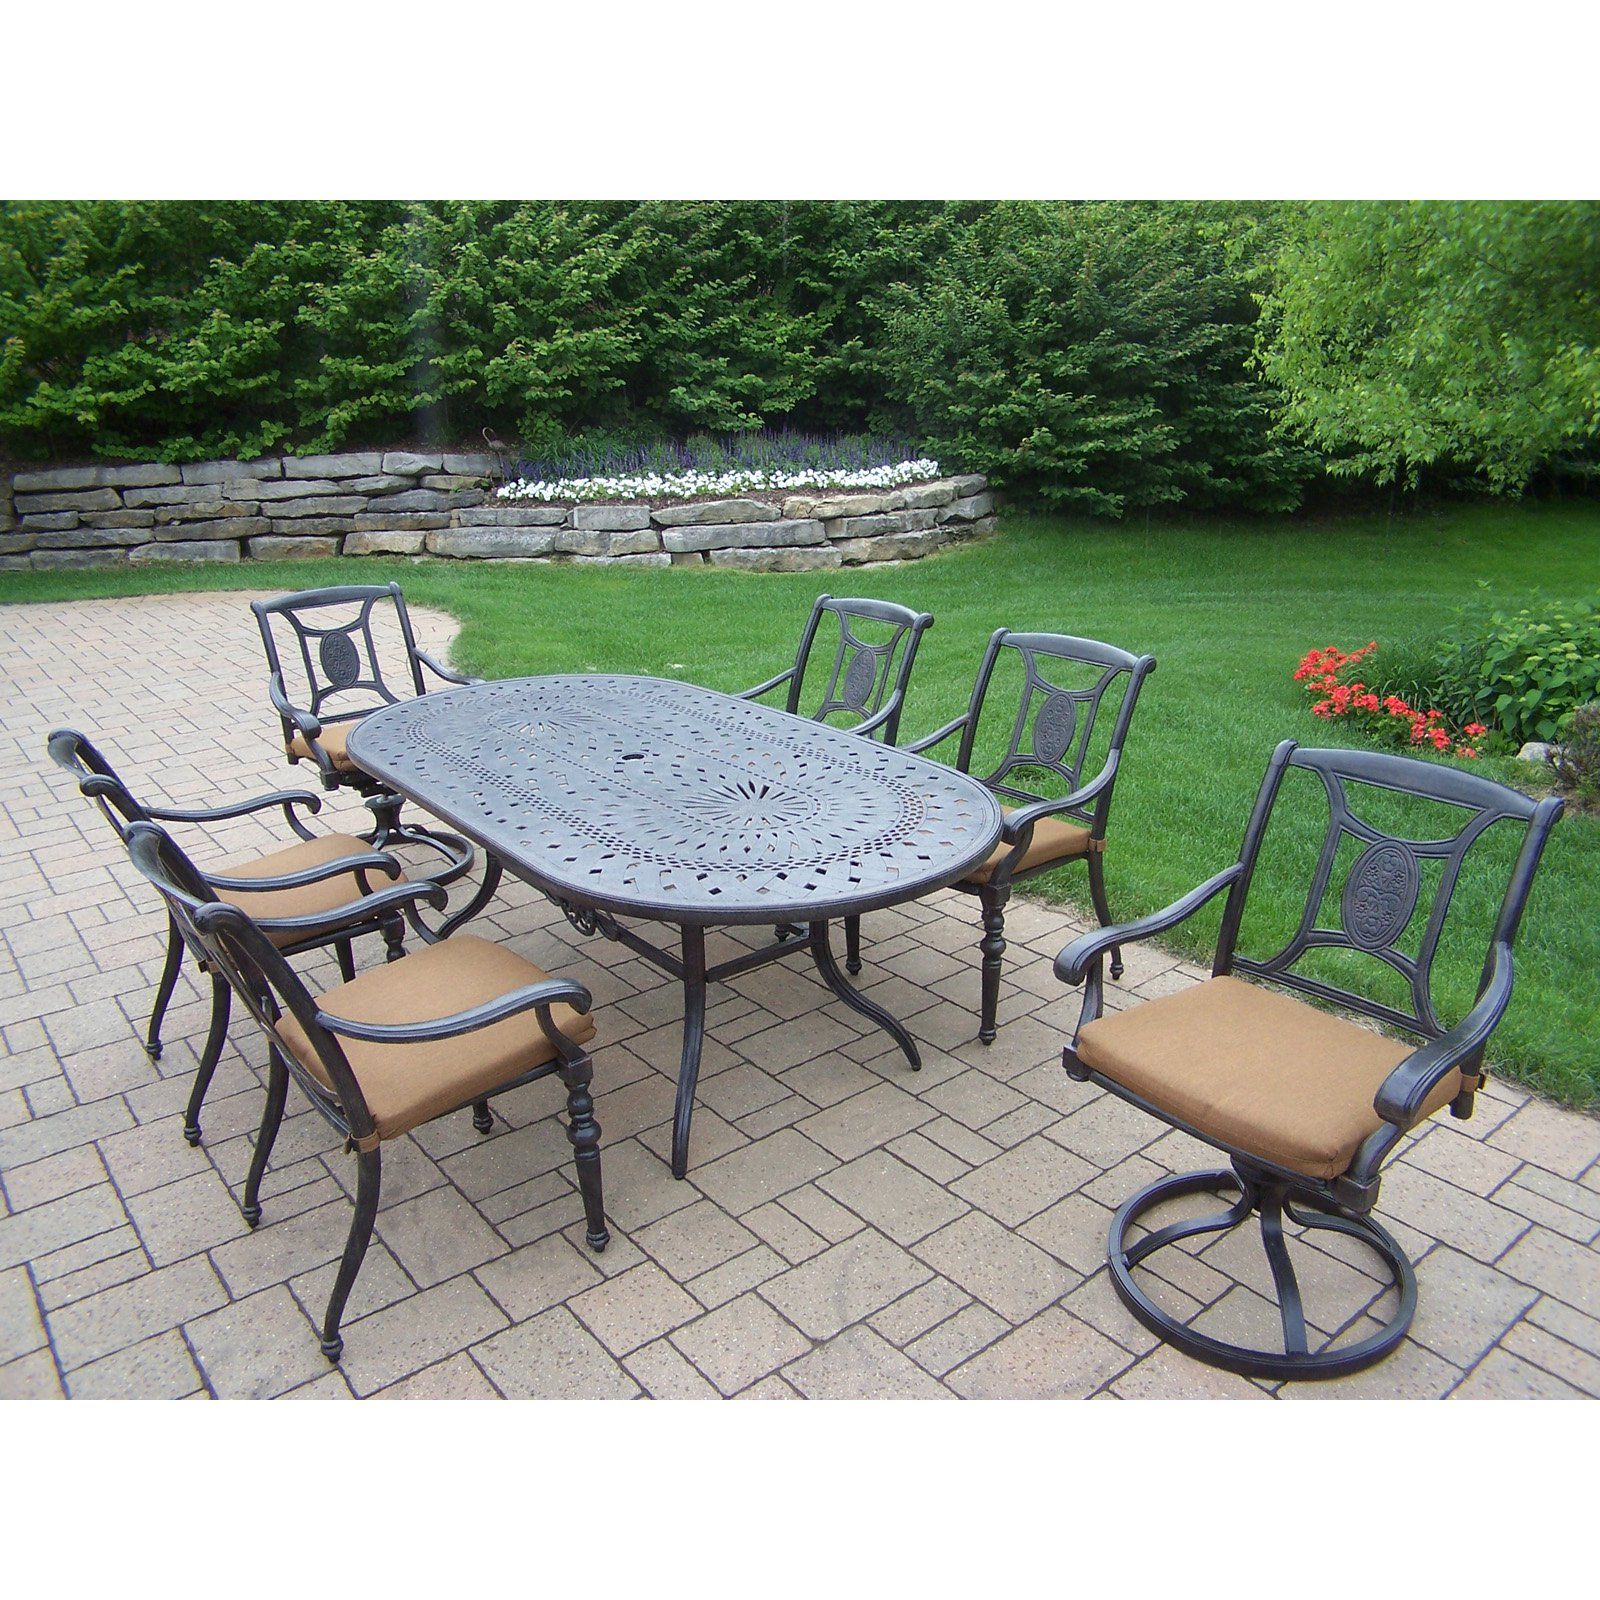 Oval 7 Piece Outdoor Patio Dining Sets Regarding Best And Newest Oakland Living Victoria Aluminum 7 Piece Oval Patio Dining Set (View 10 of 15)